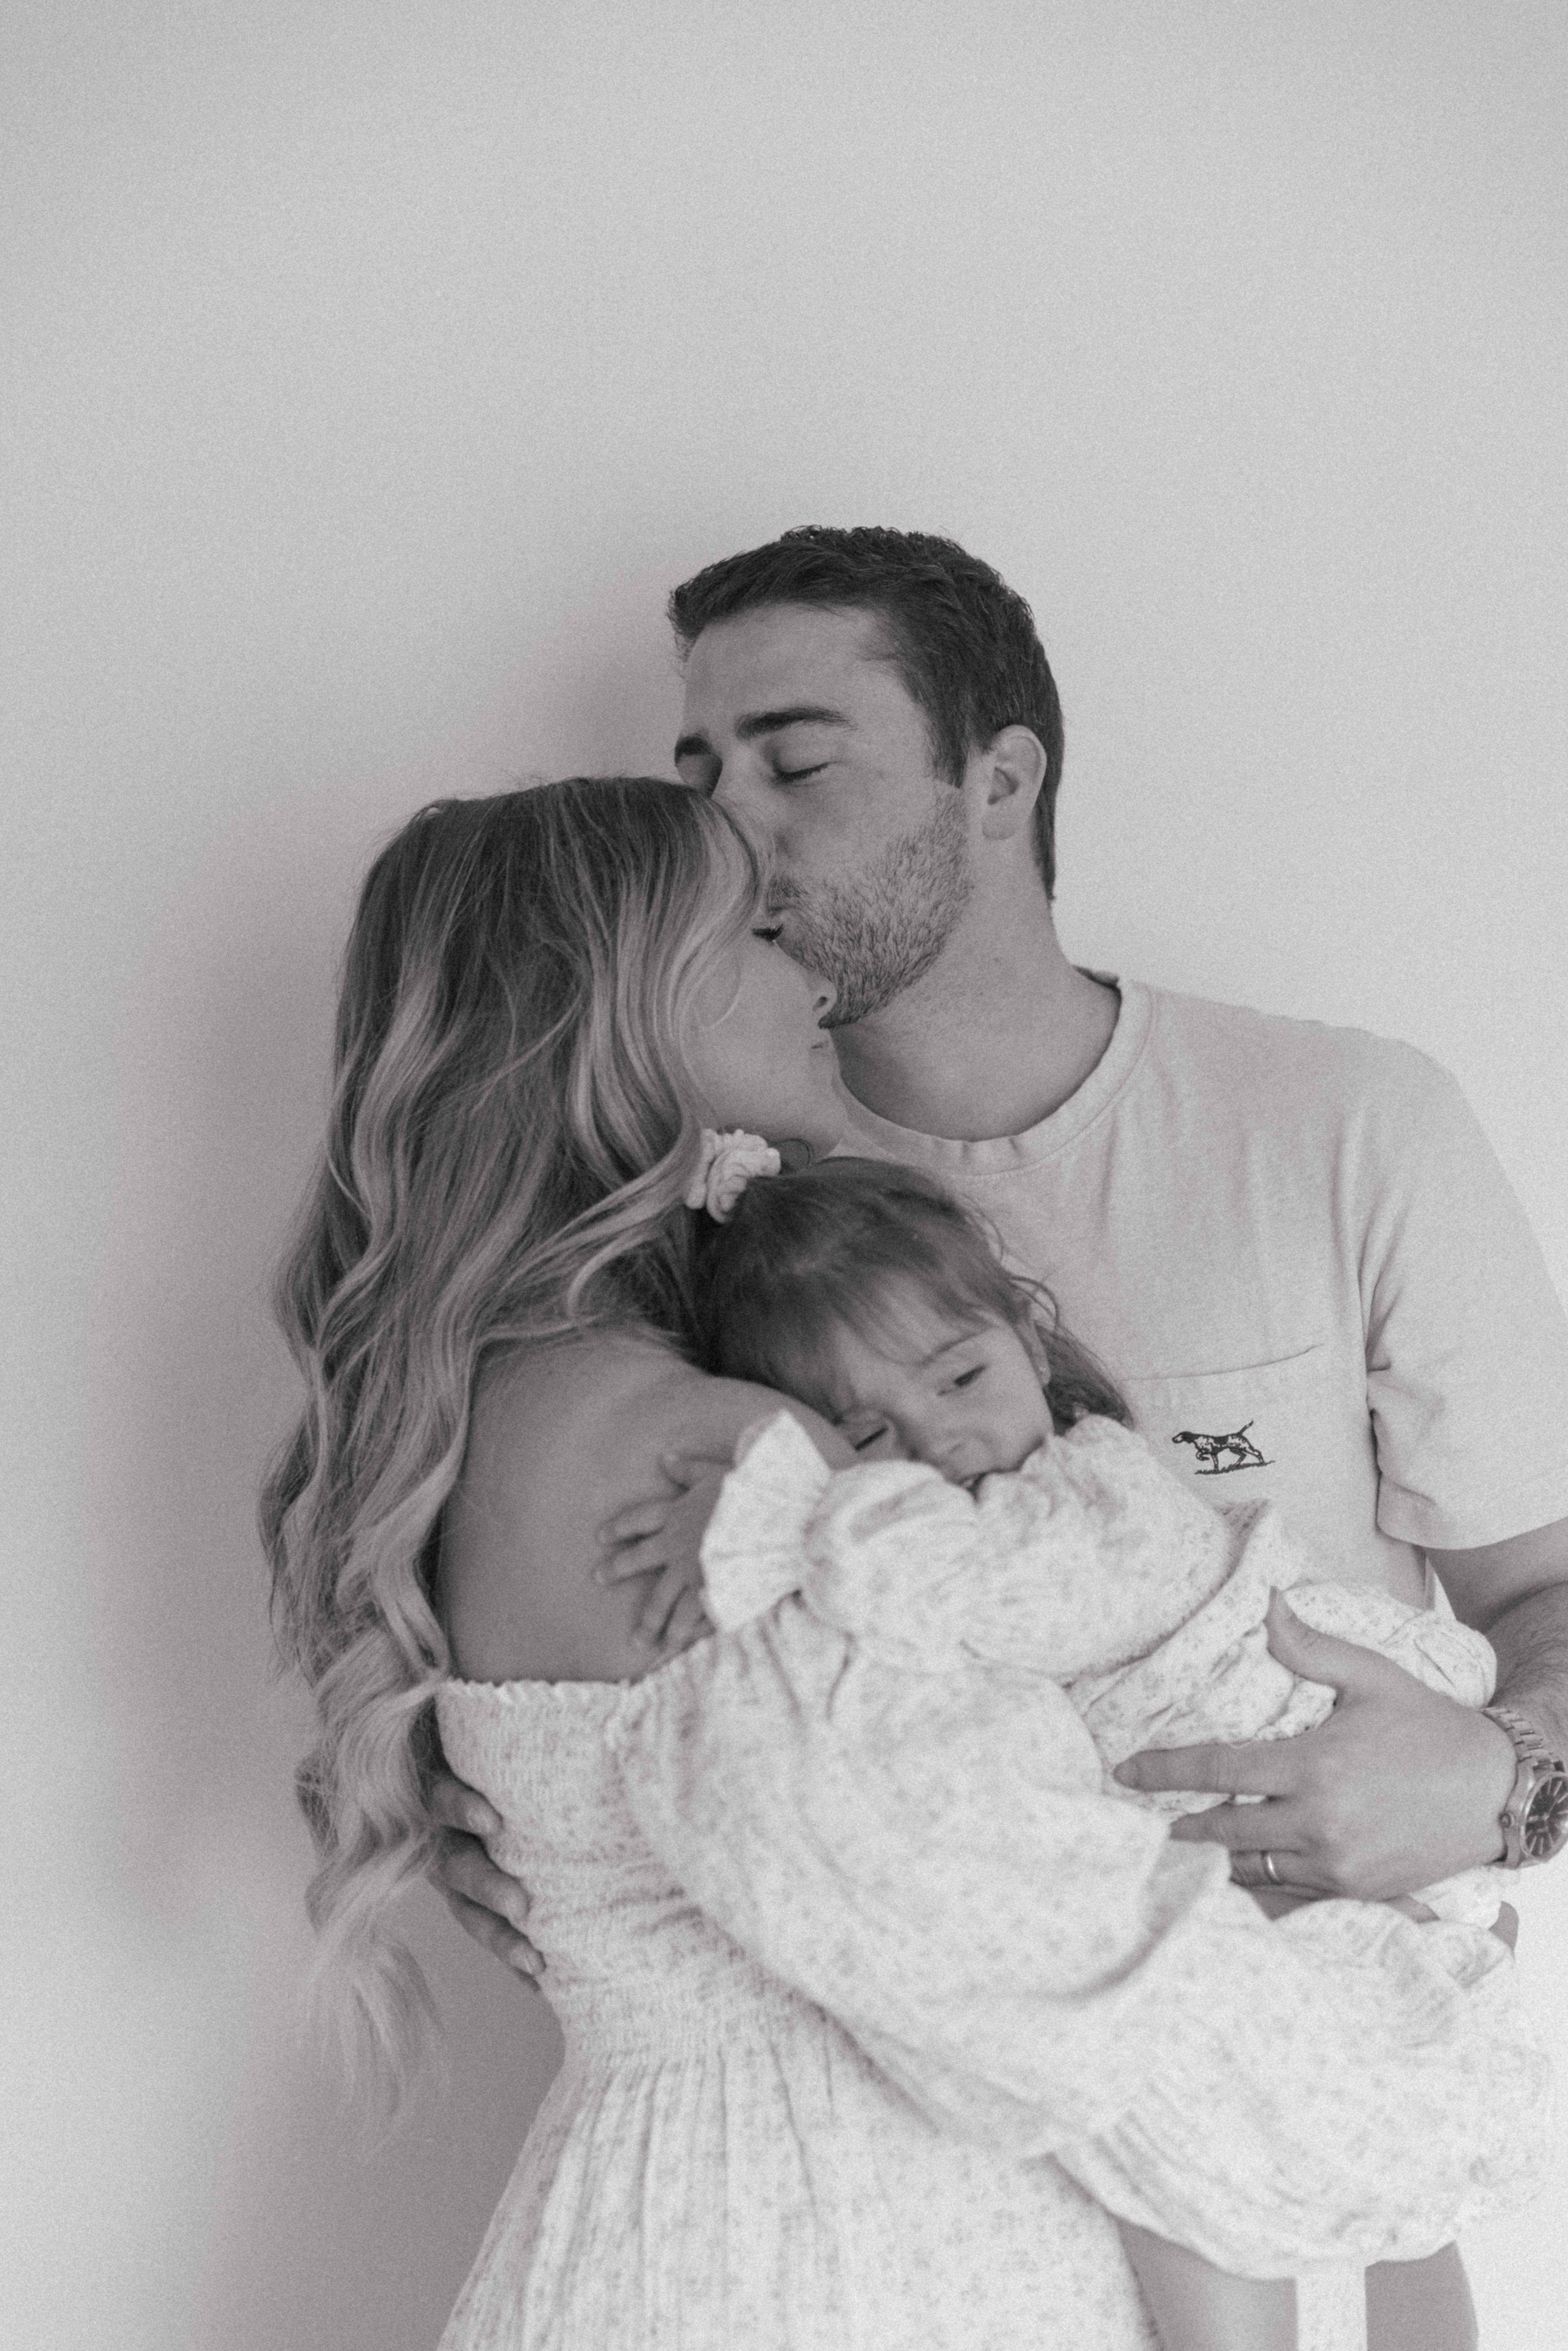 husband kissing wife's forehead while she holds their toddler during a studio maternity photoshoot